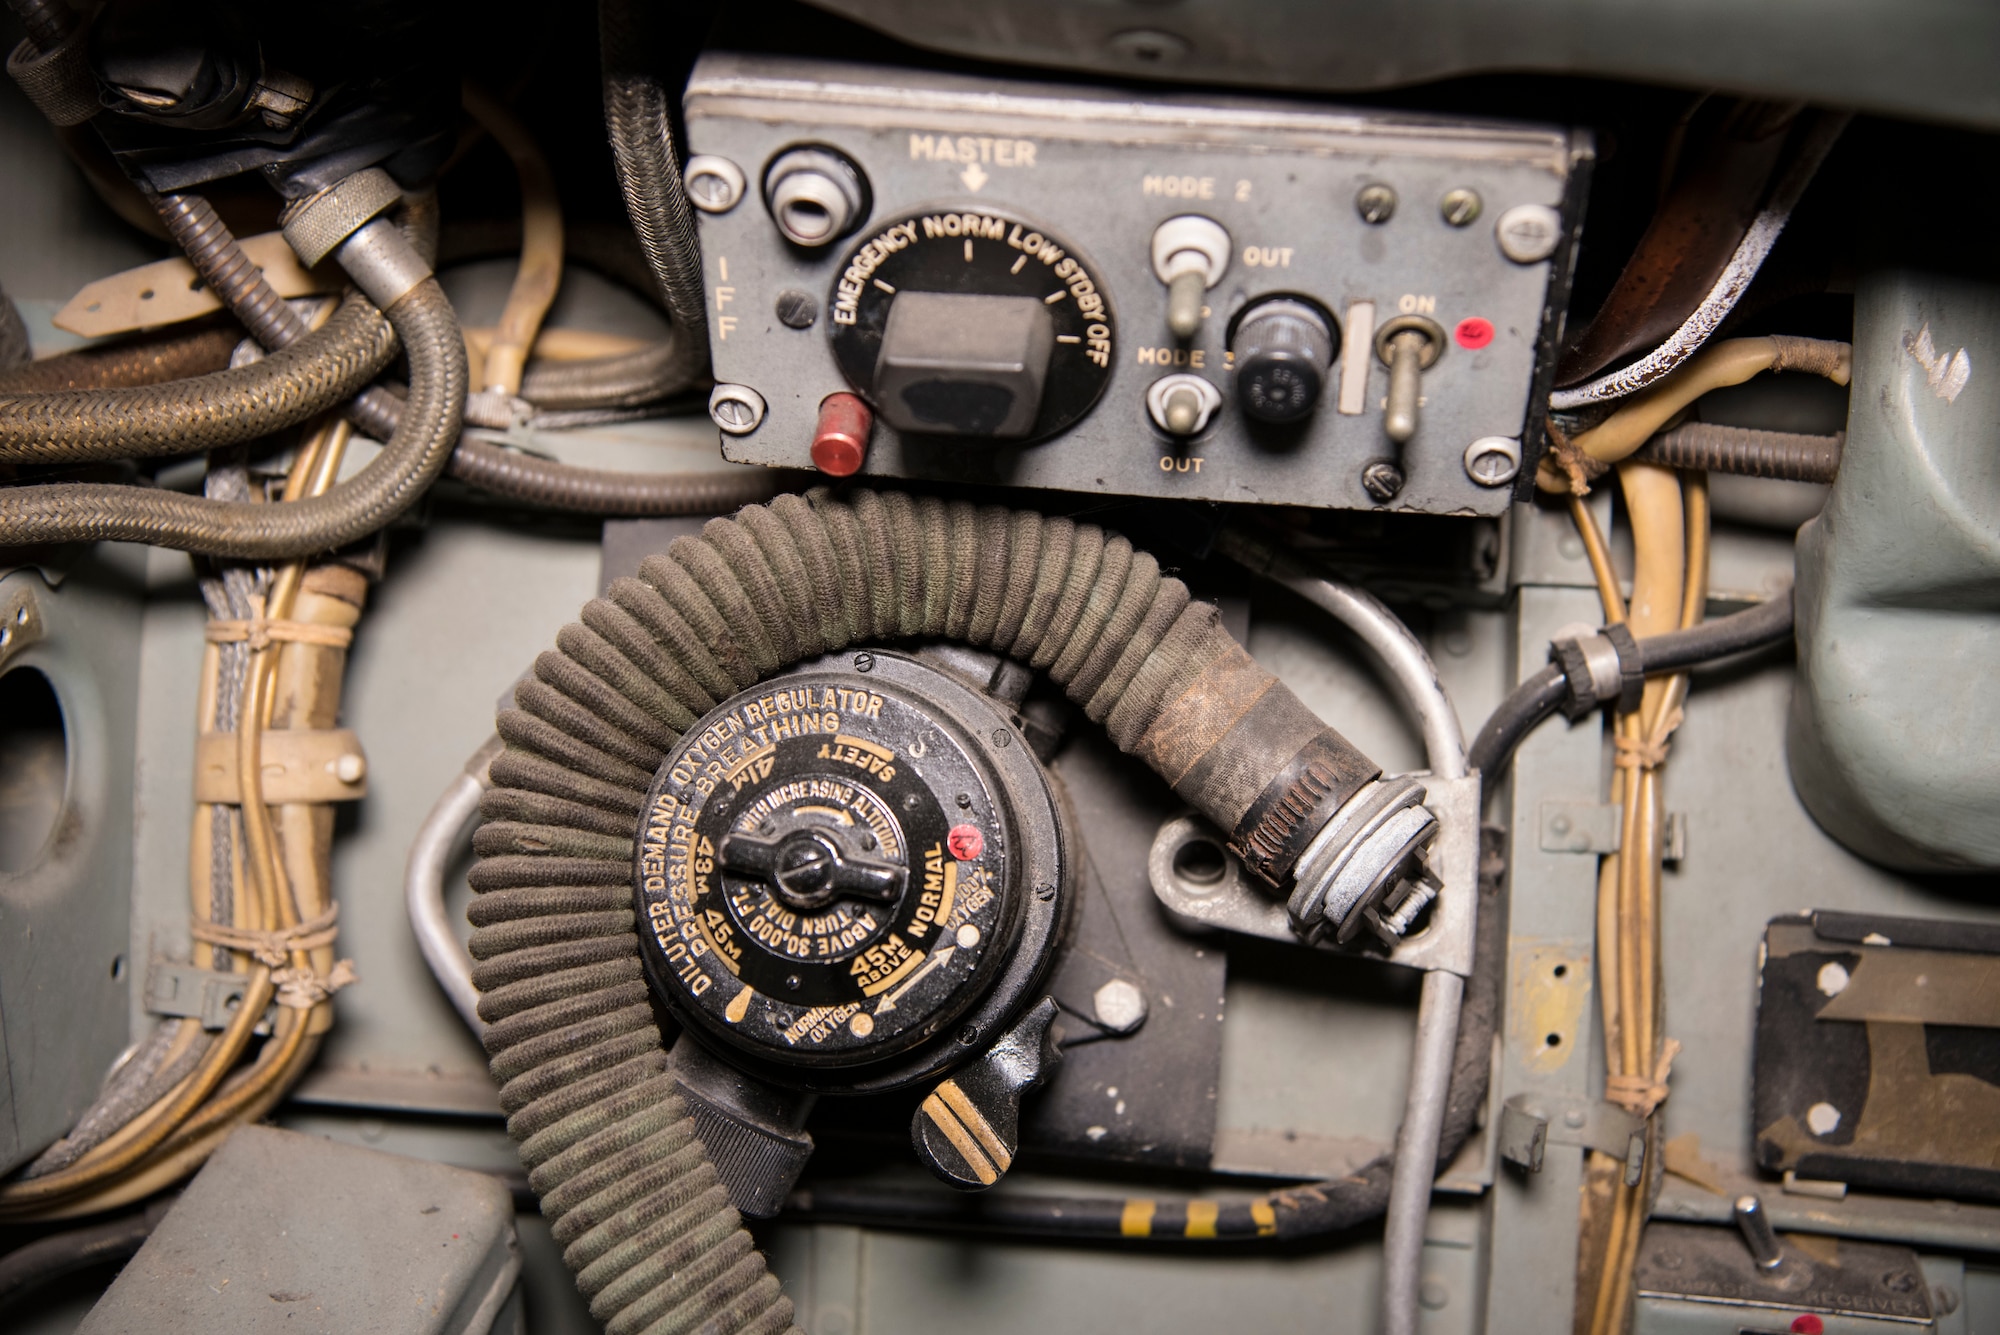 DAYTON, Ohio -- Mikoyan-Gurevich MiG-15 cockpit view in the Korean War Gallery at the National Museum of the United States Air Force. (U.S. Air Force photo by Ken LaRock)